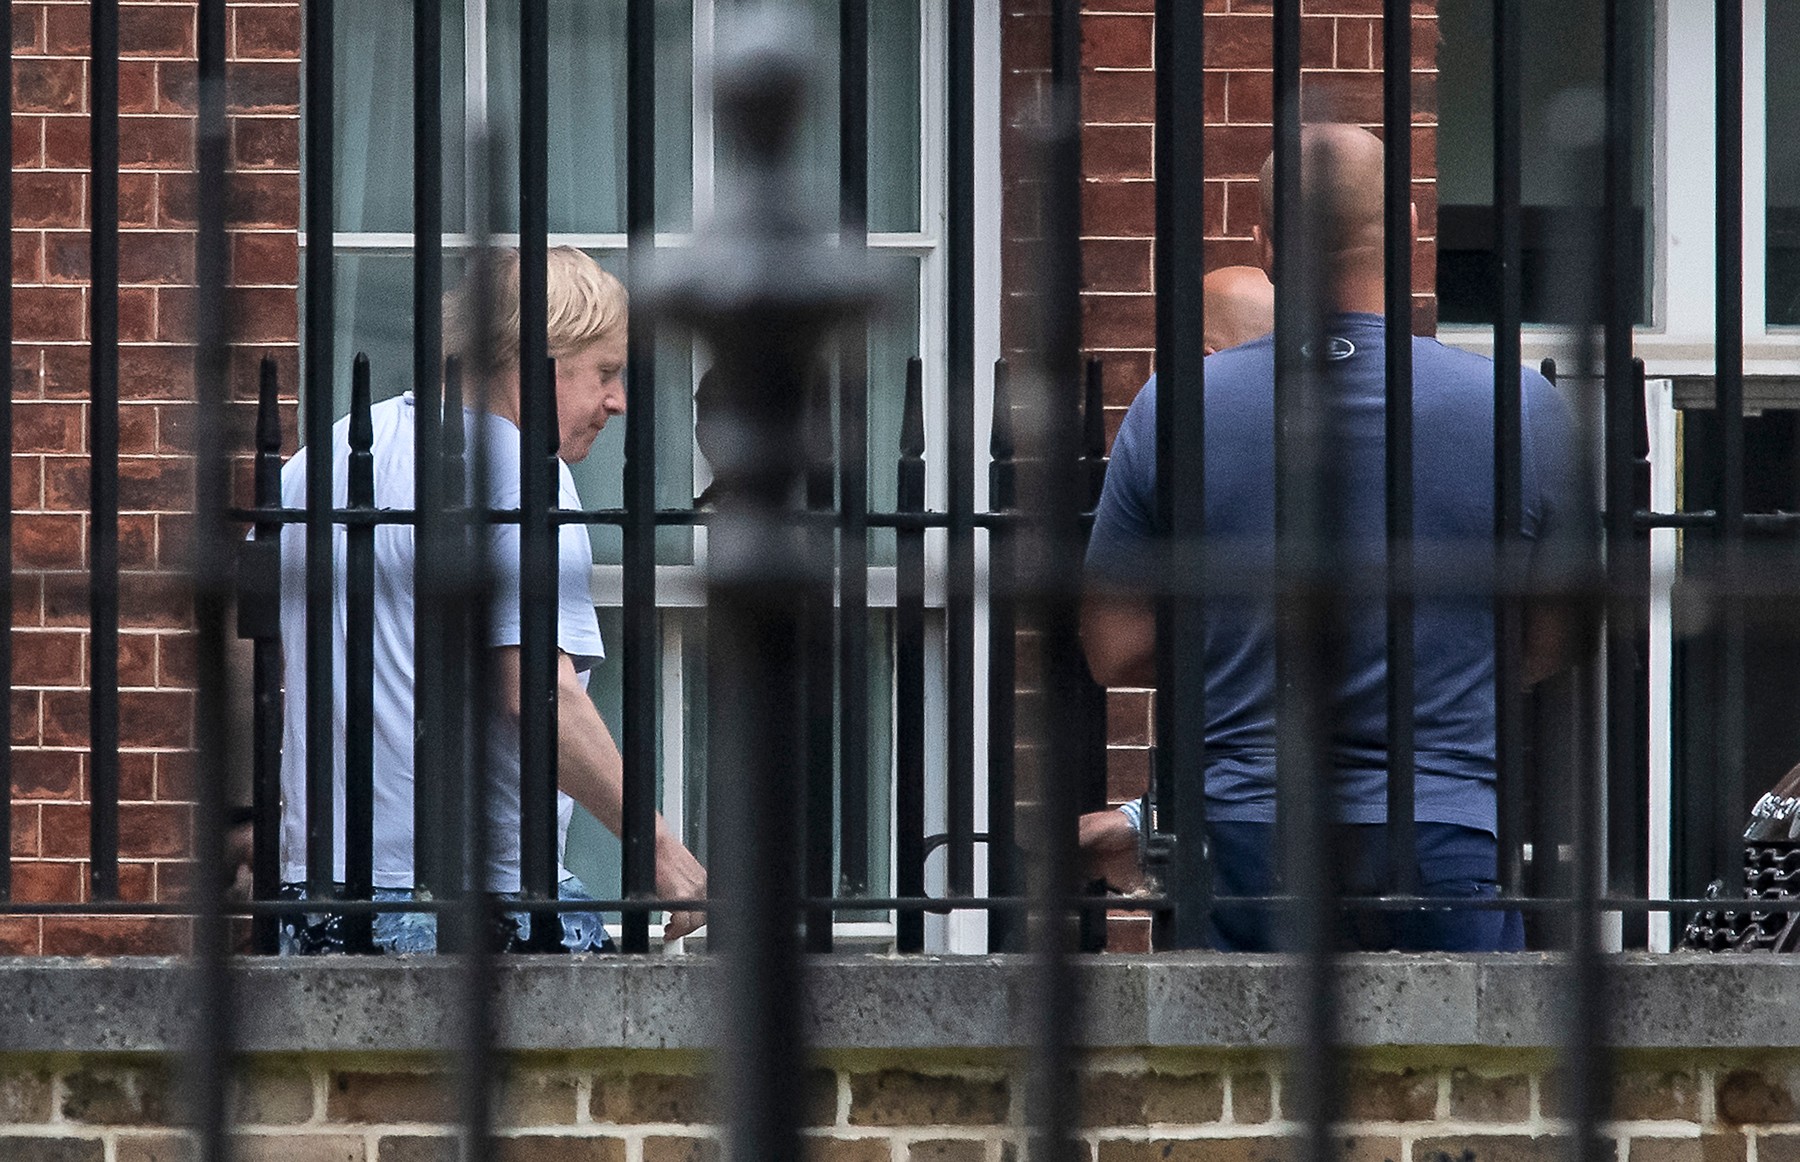 19/05/2020. London, UK. British Prime Minister BORIS JOHNSON is seen returning to Downing Street after a morning jog in a private gardens. The PM, who has pledged to tackle obesity in the UK, is recovering after being hospitalised with the COVID-19 strain of Coronavirus., Image: 520535593, License: Rights-managed, Restrictions: *** UK Out ***, Model Release: no, Credit line: Ben Cawthra / ddp USA / Profimedia